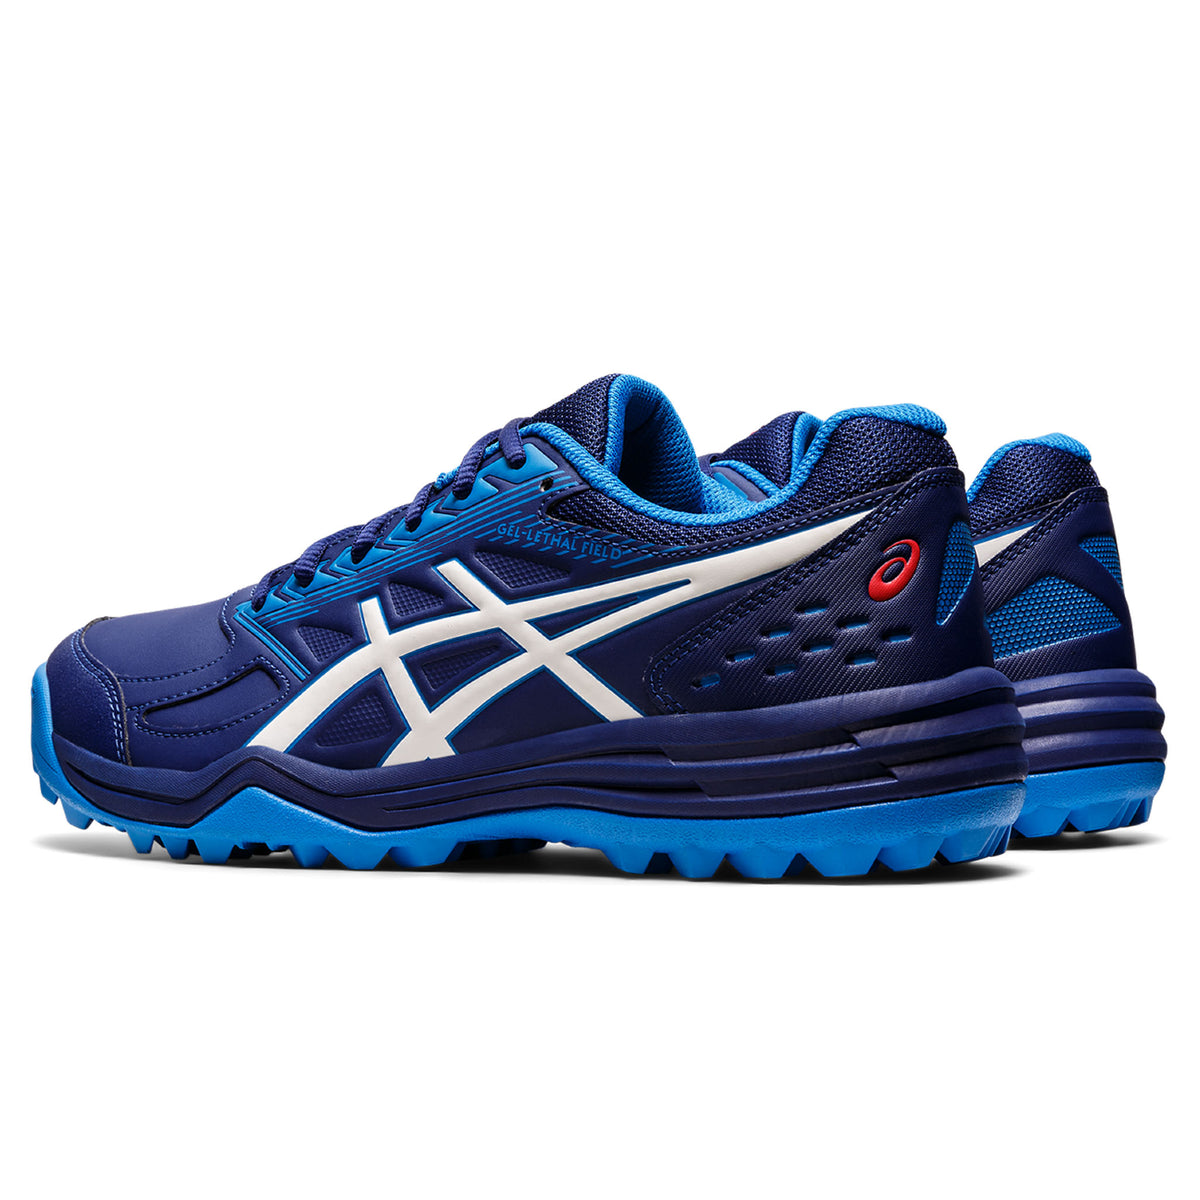 Asics Gel Lethal Field Mens Hockey Shoes: Dive Blue/White